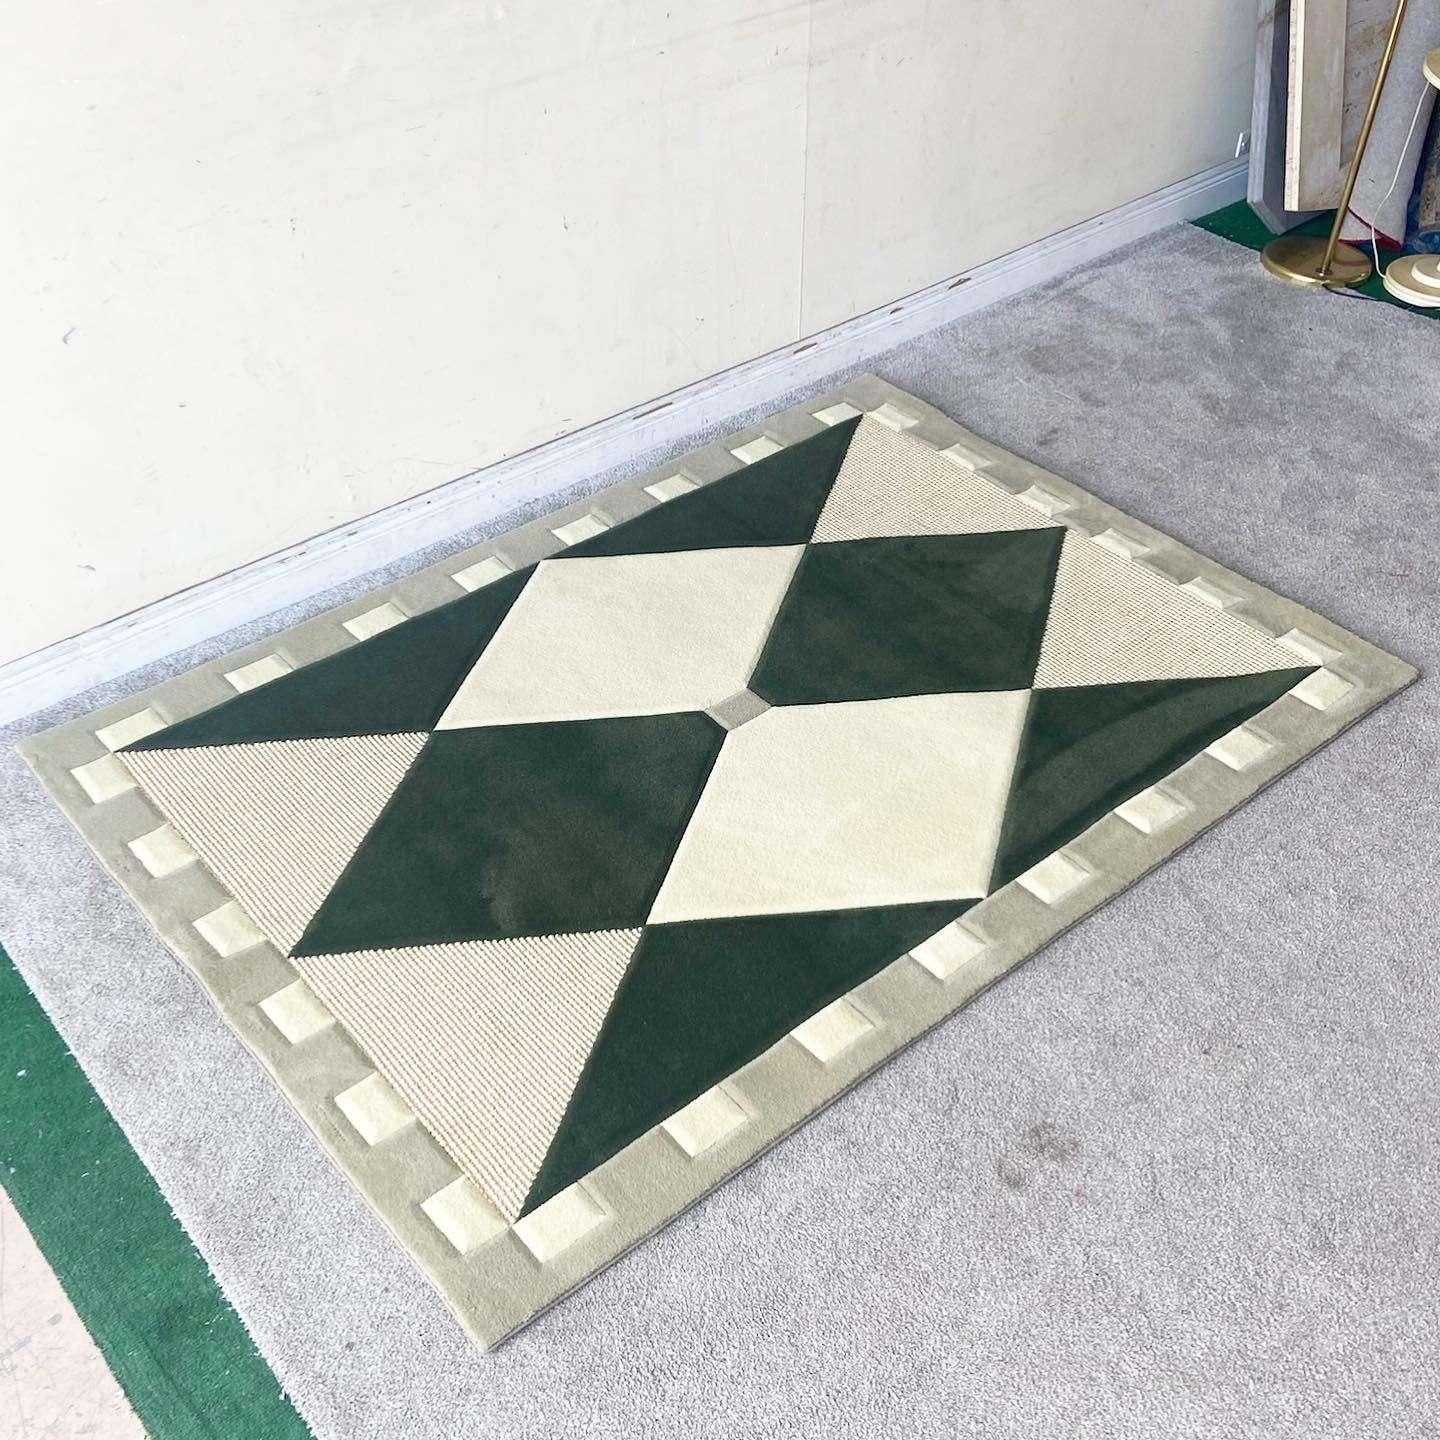 Exceptional vintage boho chic rectangular area rug. The interior displays cream, dark green and woven diamonds and triangles. Th outer edge is a light green with cream rectangles throughout.

Rug 35
